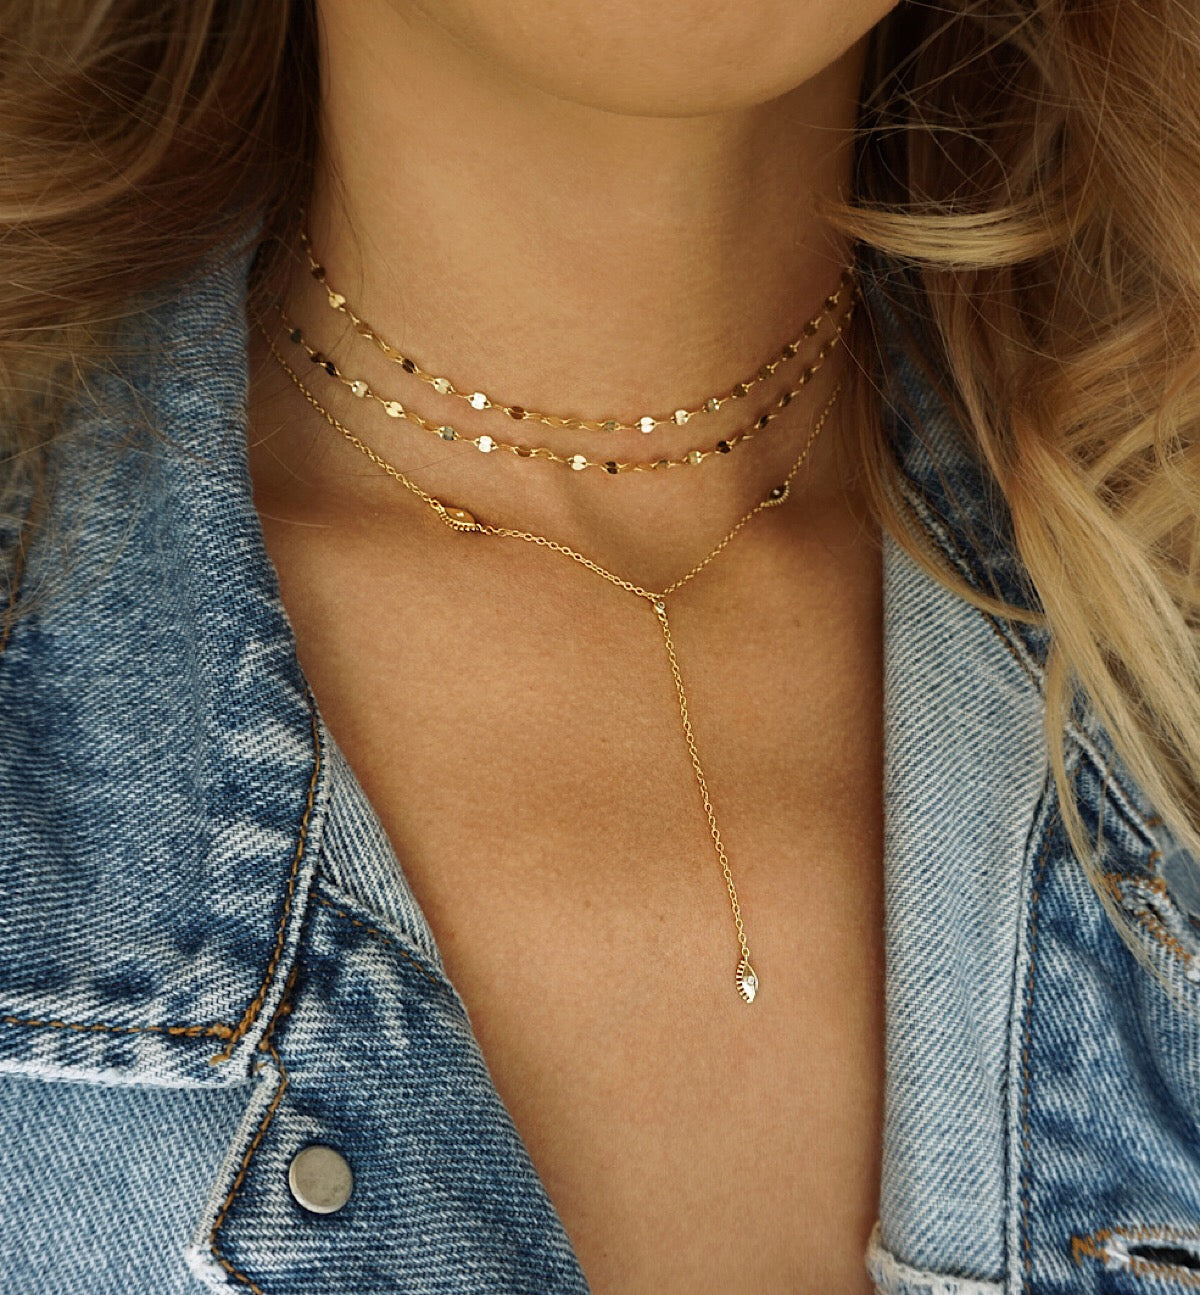 Aila Choker Lariat Necklace, Necklaces - AMY O. Jewelry